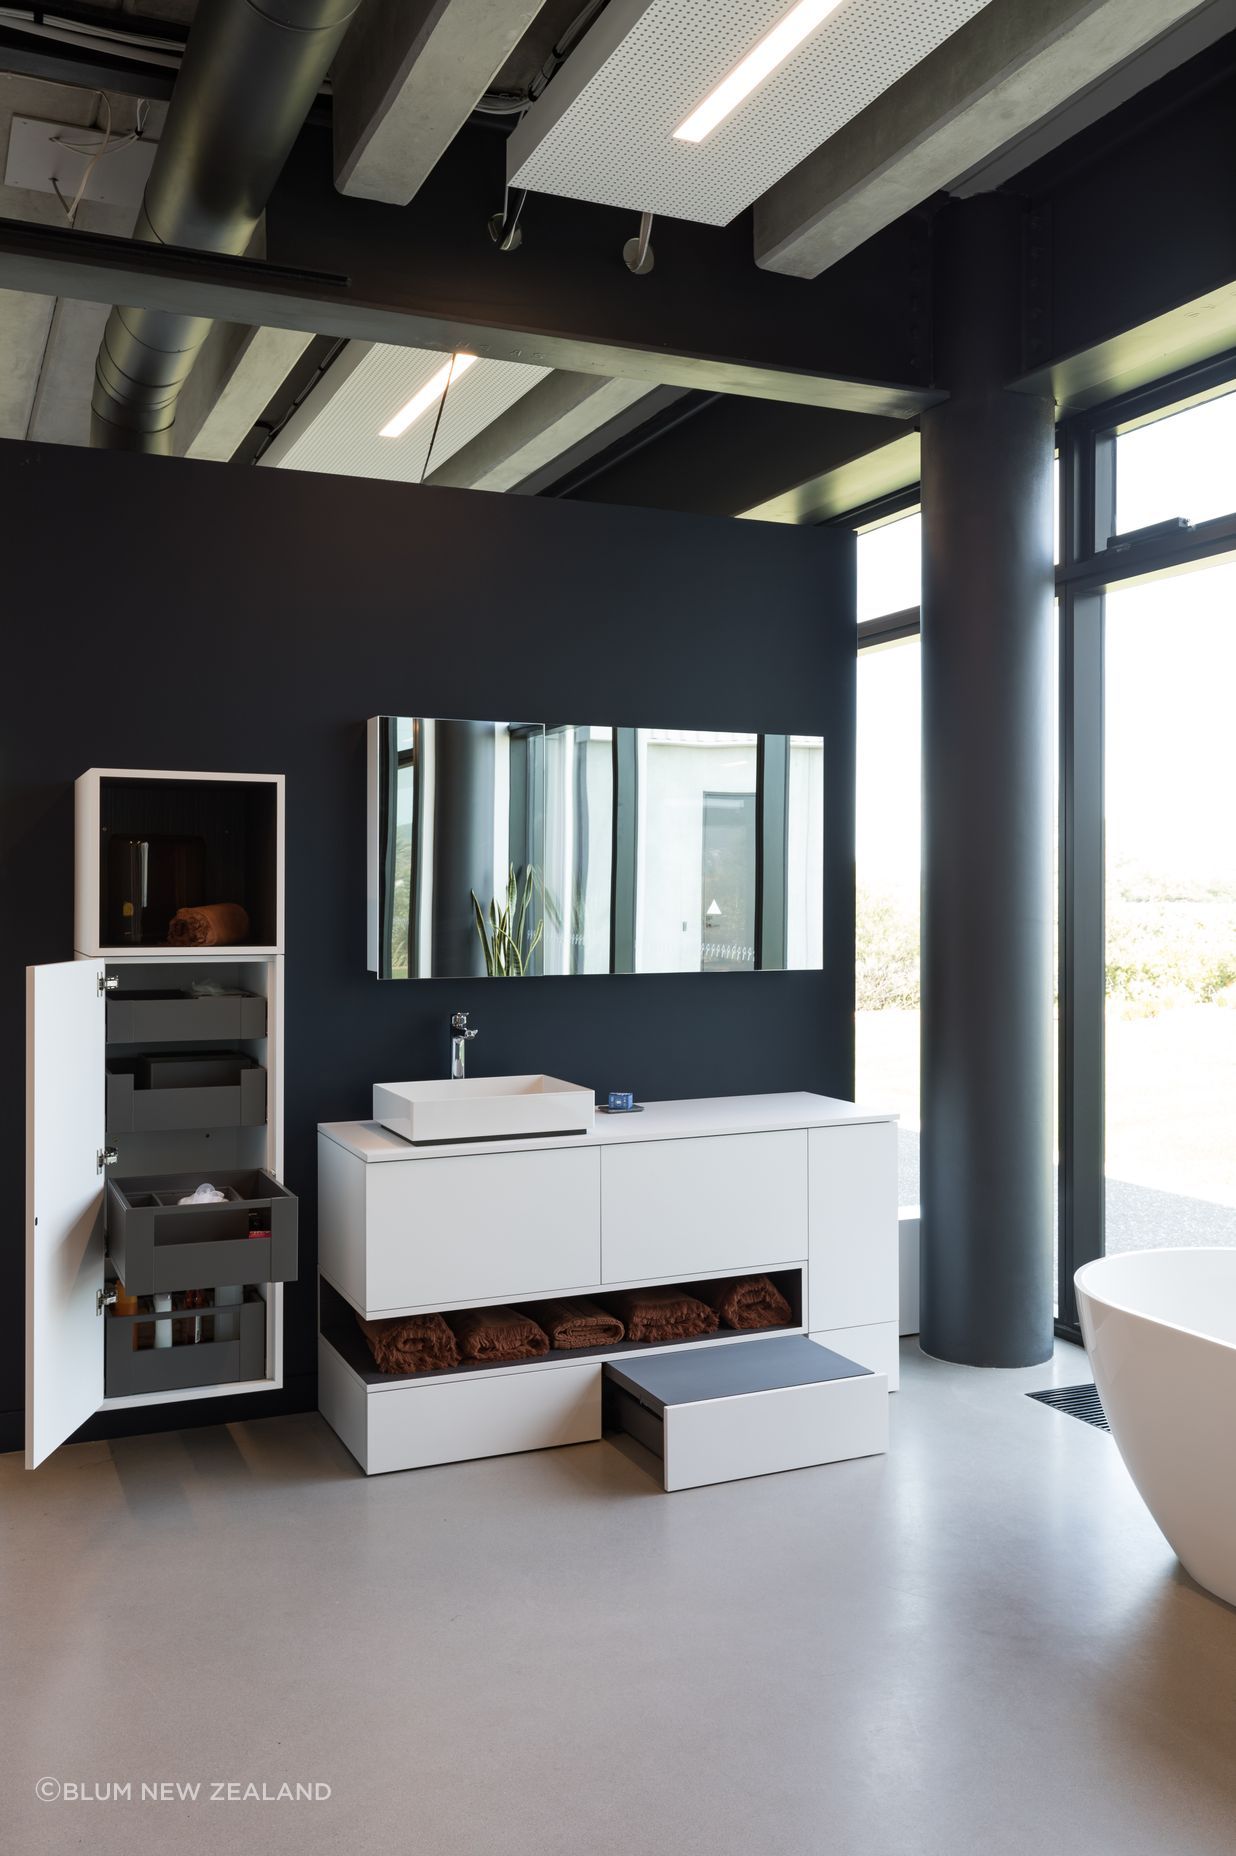 Visit Blum’s showrooms without leaving your room